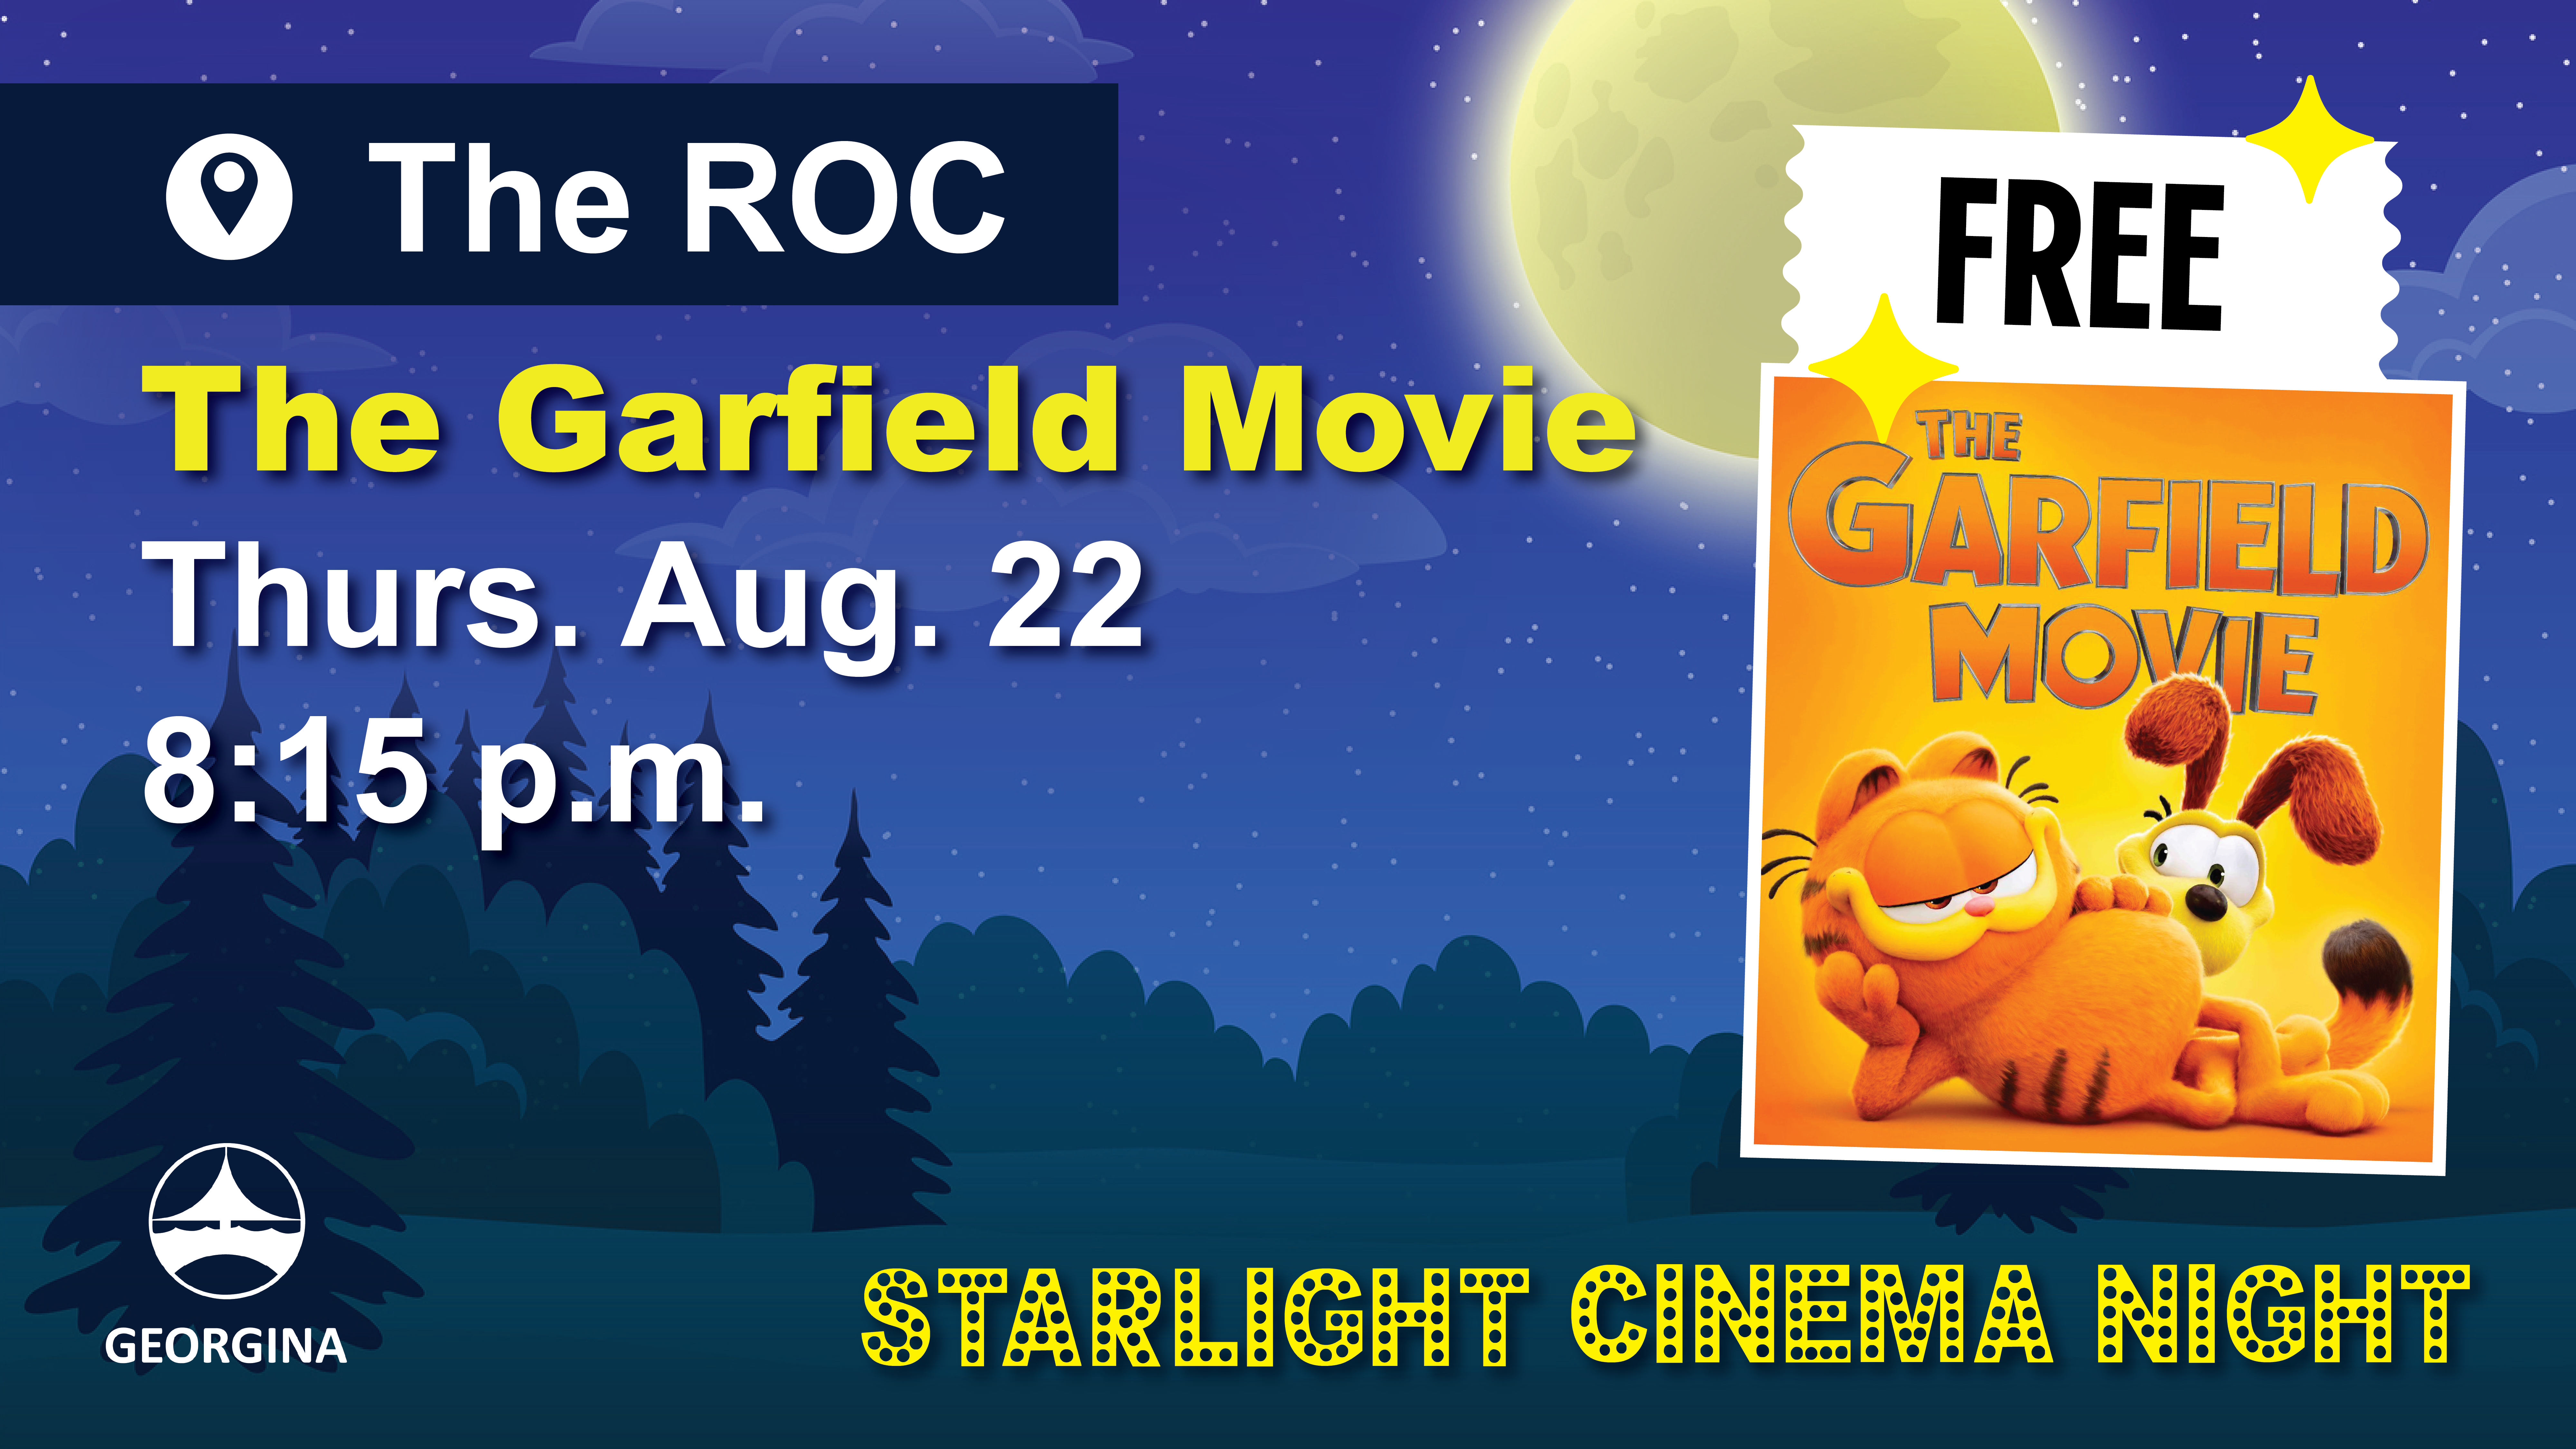 Poster for Starlight Cinema Night with the text The ROC The Garfield Movie Thus. Aug. 22 8:15 p.m. with movie poster and word Free